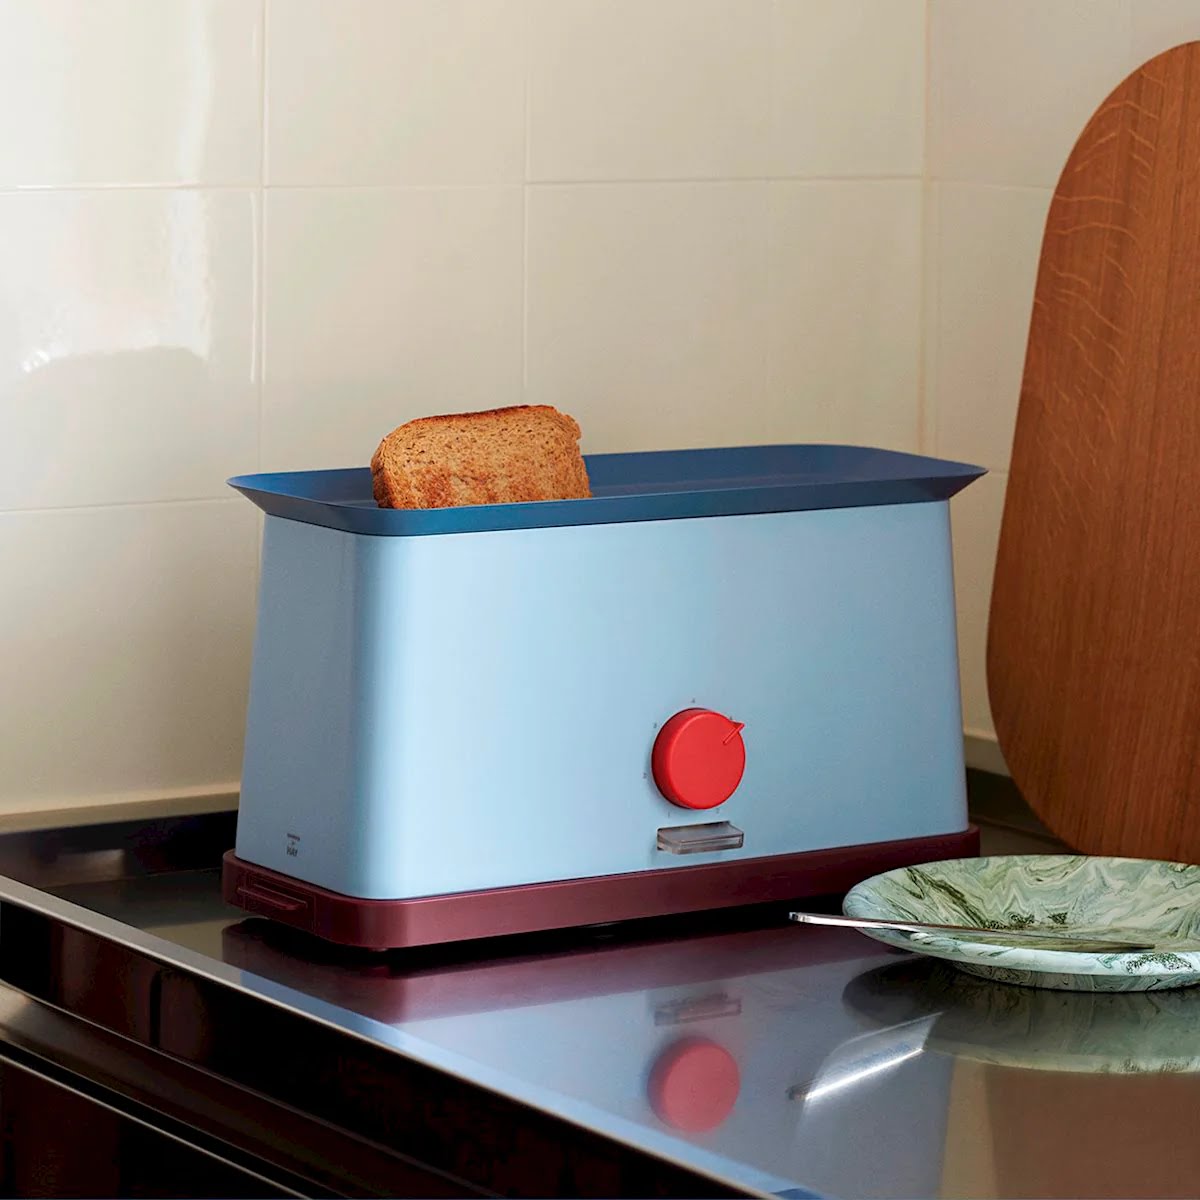 Industry + Co, Swoden Toaster, €119